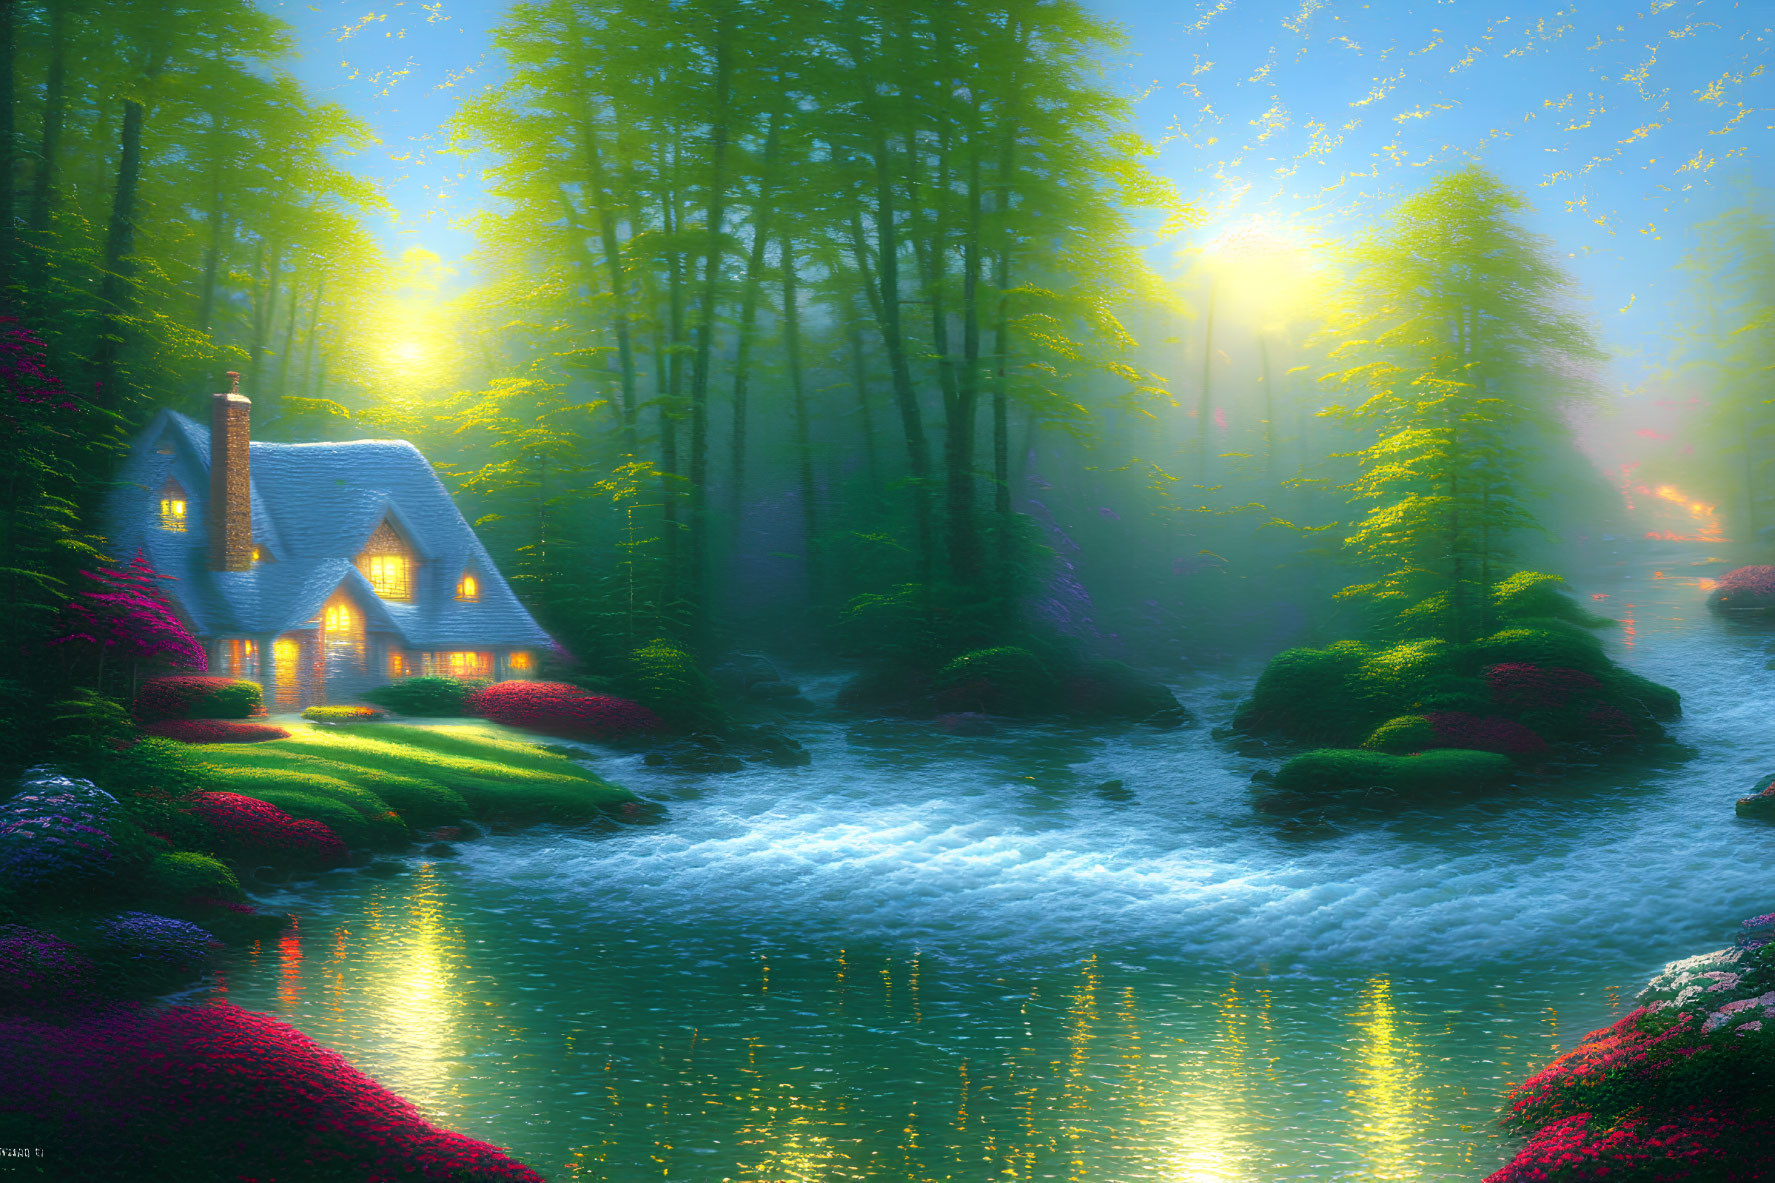 Enchanting cottage in magical forest with glowing windows